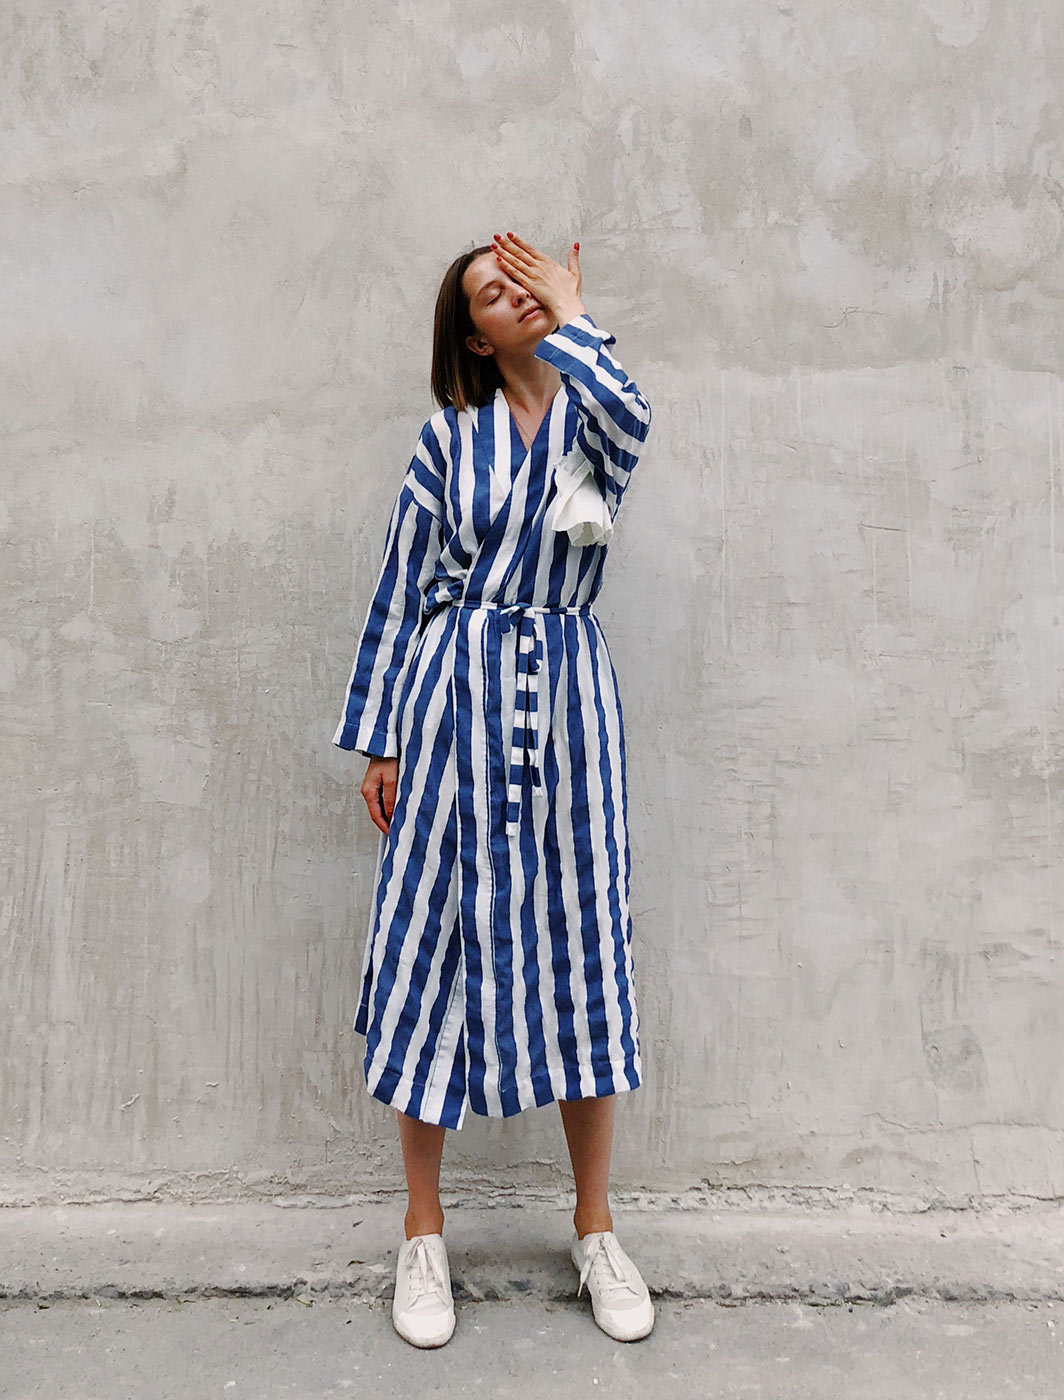 woman-in-blue-and-white-striped-dress-covering-her-left-eye-1182702